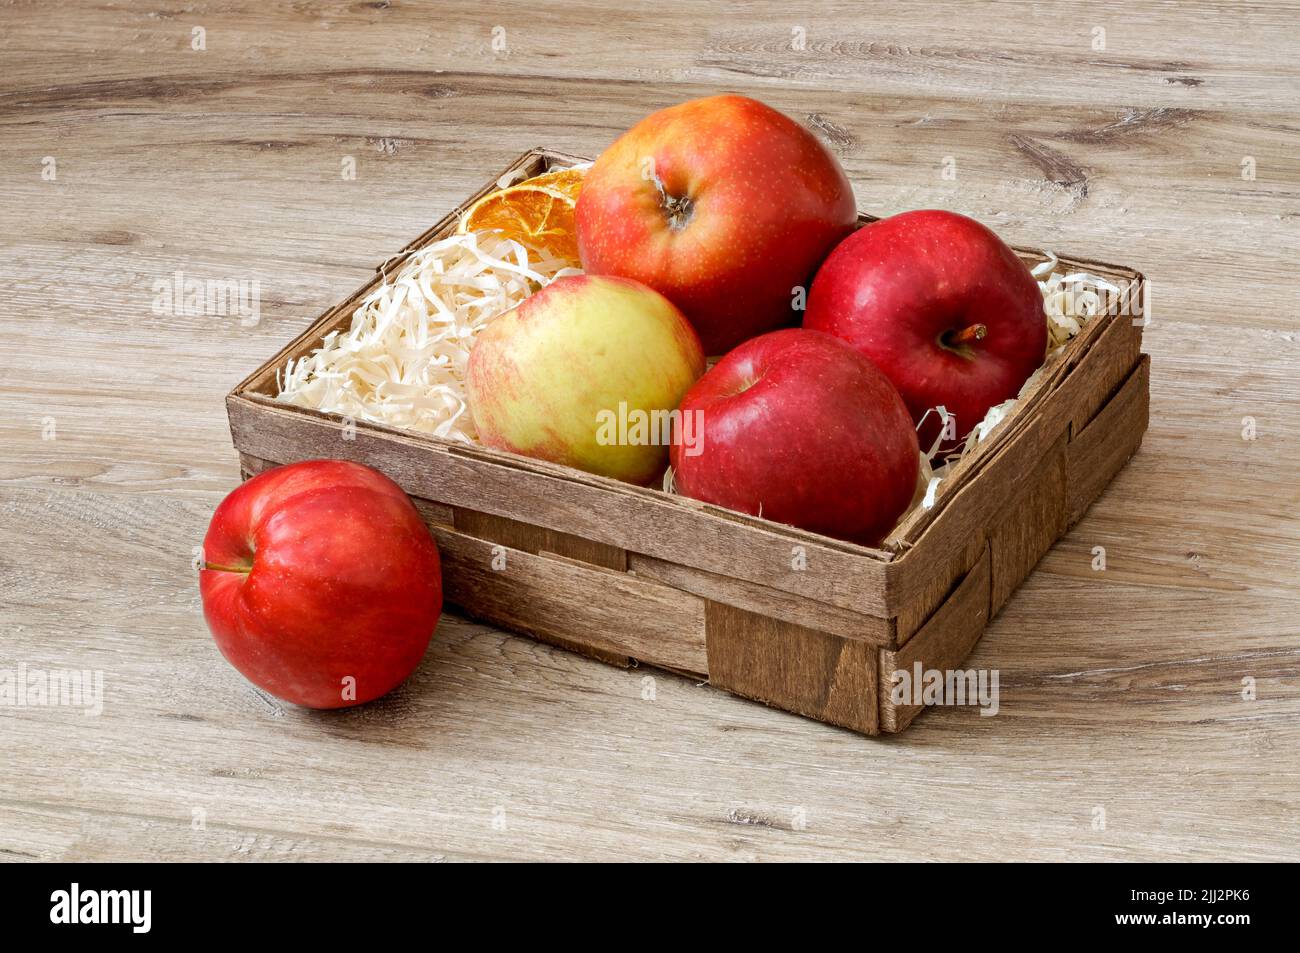 apples in a decorative box lined with wood shavings against the background of a wooden floor from close up, ripe fruit and slices of dried oranges Stock Photo